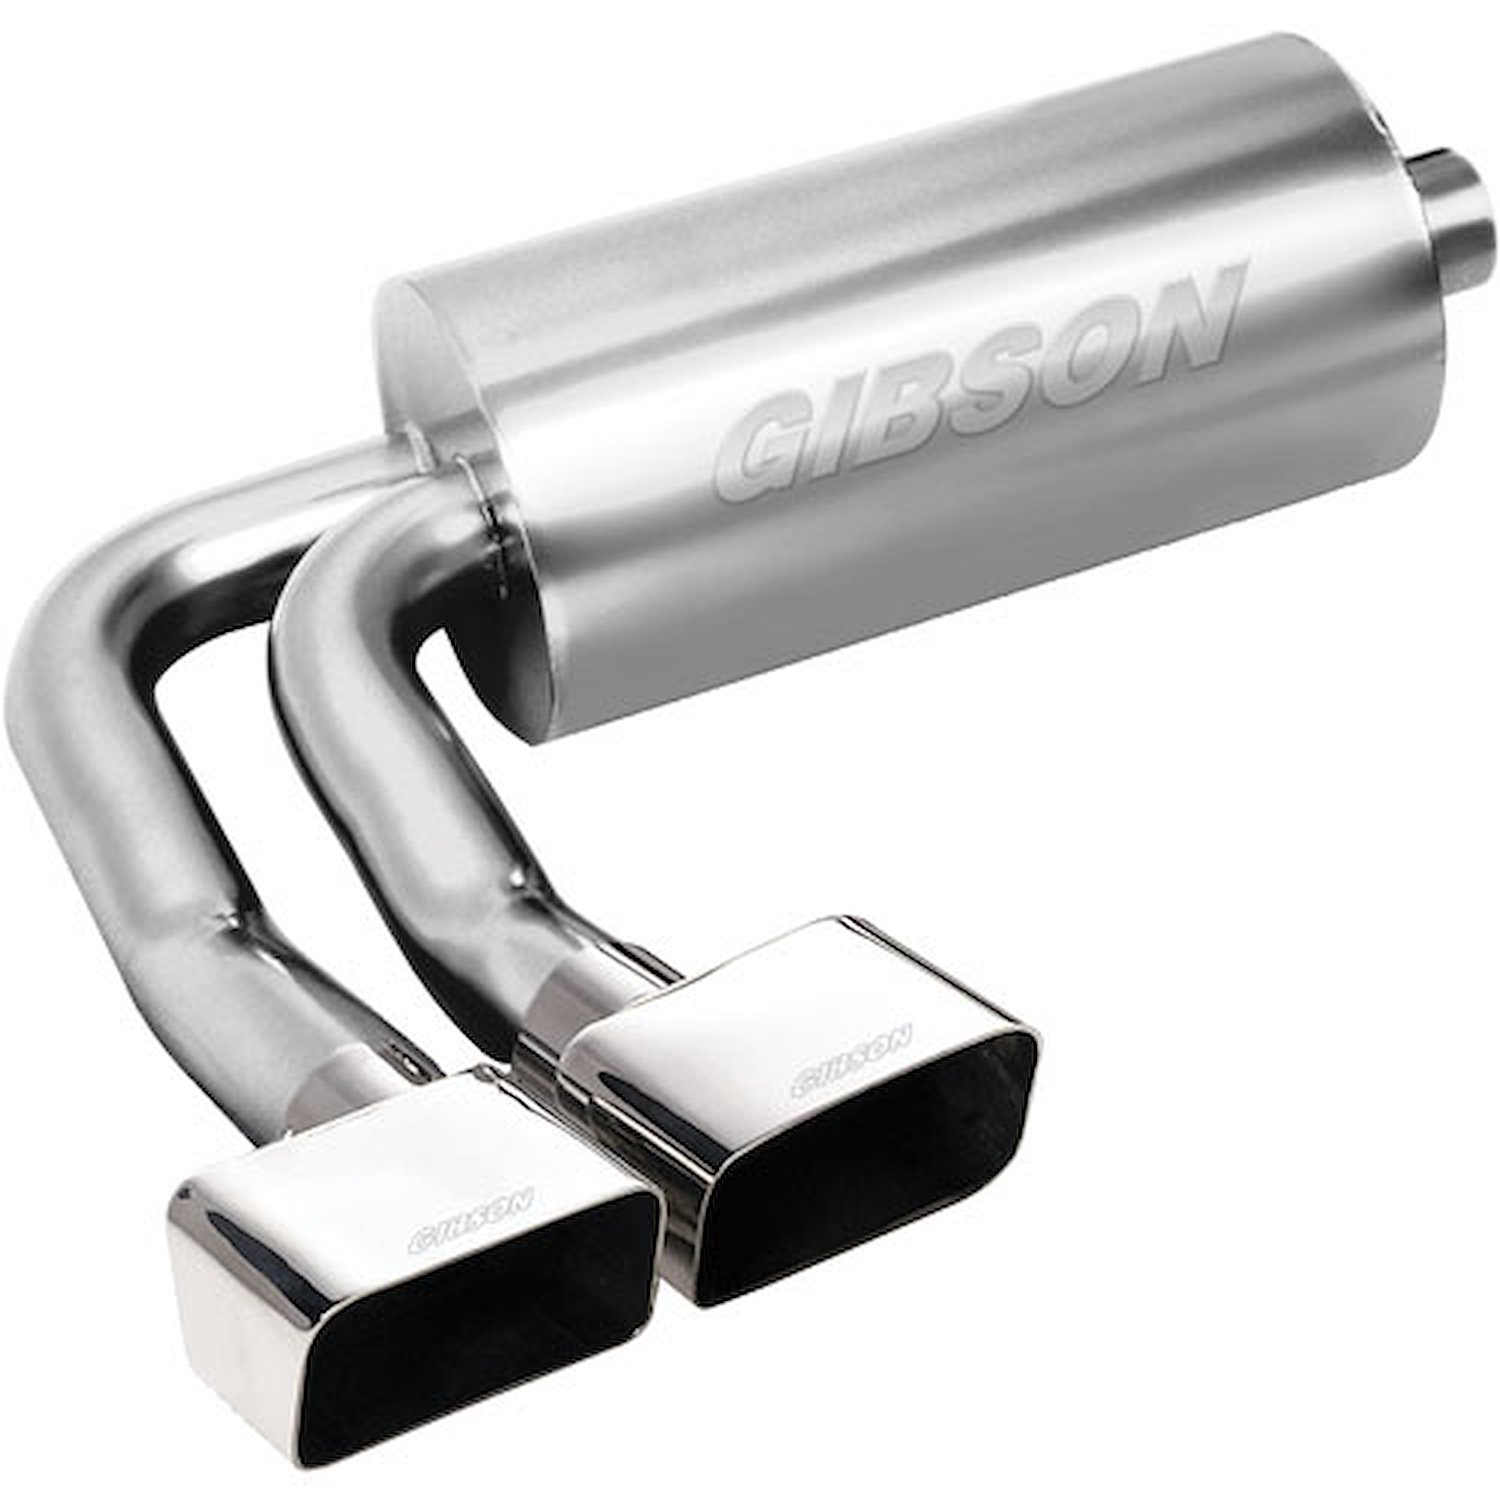 Super Truck Stainless Steel Cat-Back Exhaust 2003 Dodge Ram 1500 2WD/4WD 5.7L